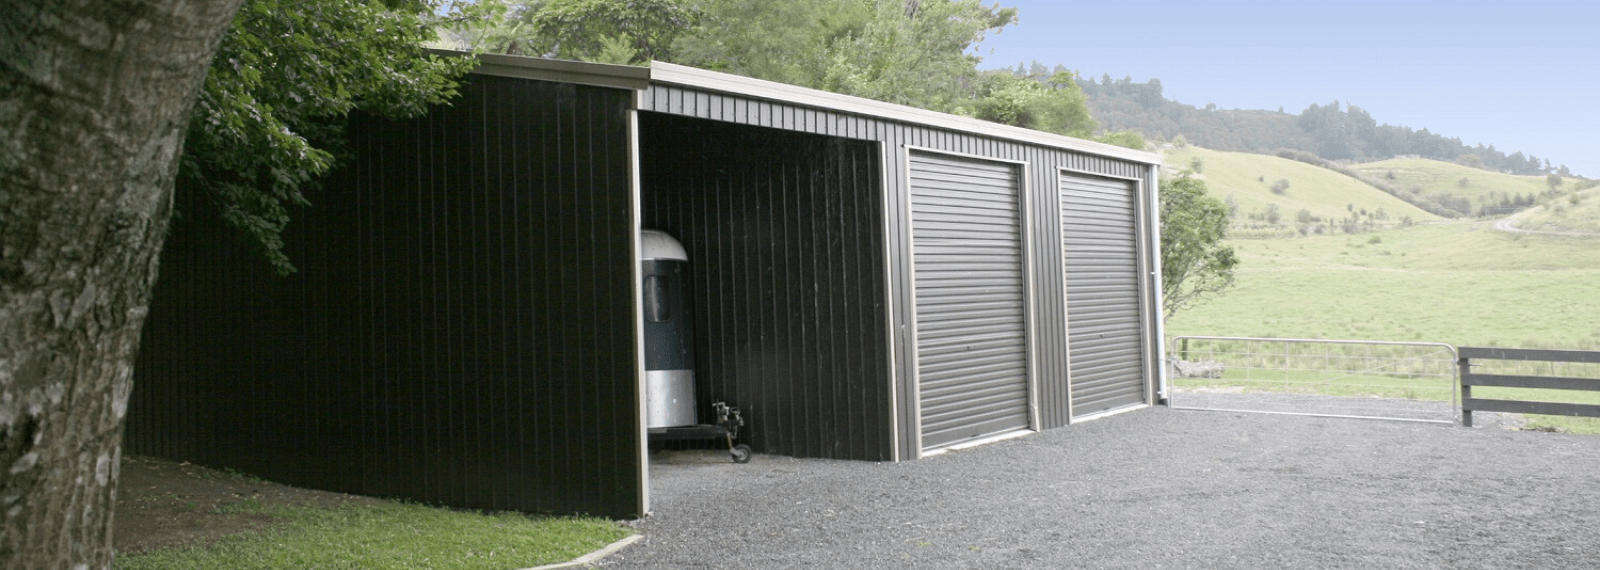 How KiwiSpan Builds Sheds Perfectly Suited for New Zealand Conditions